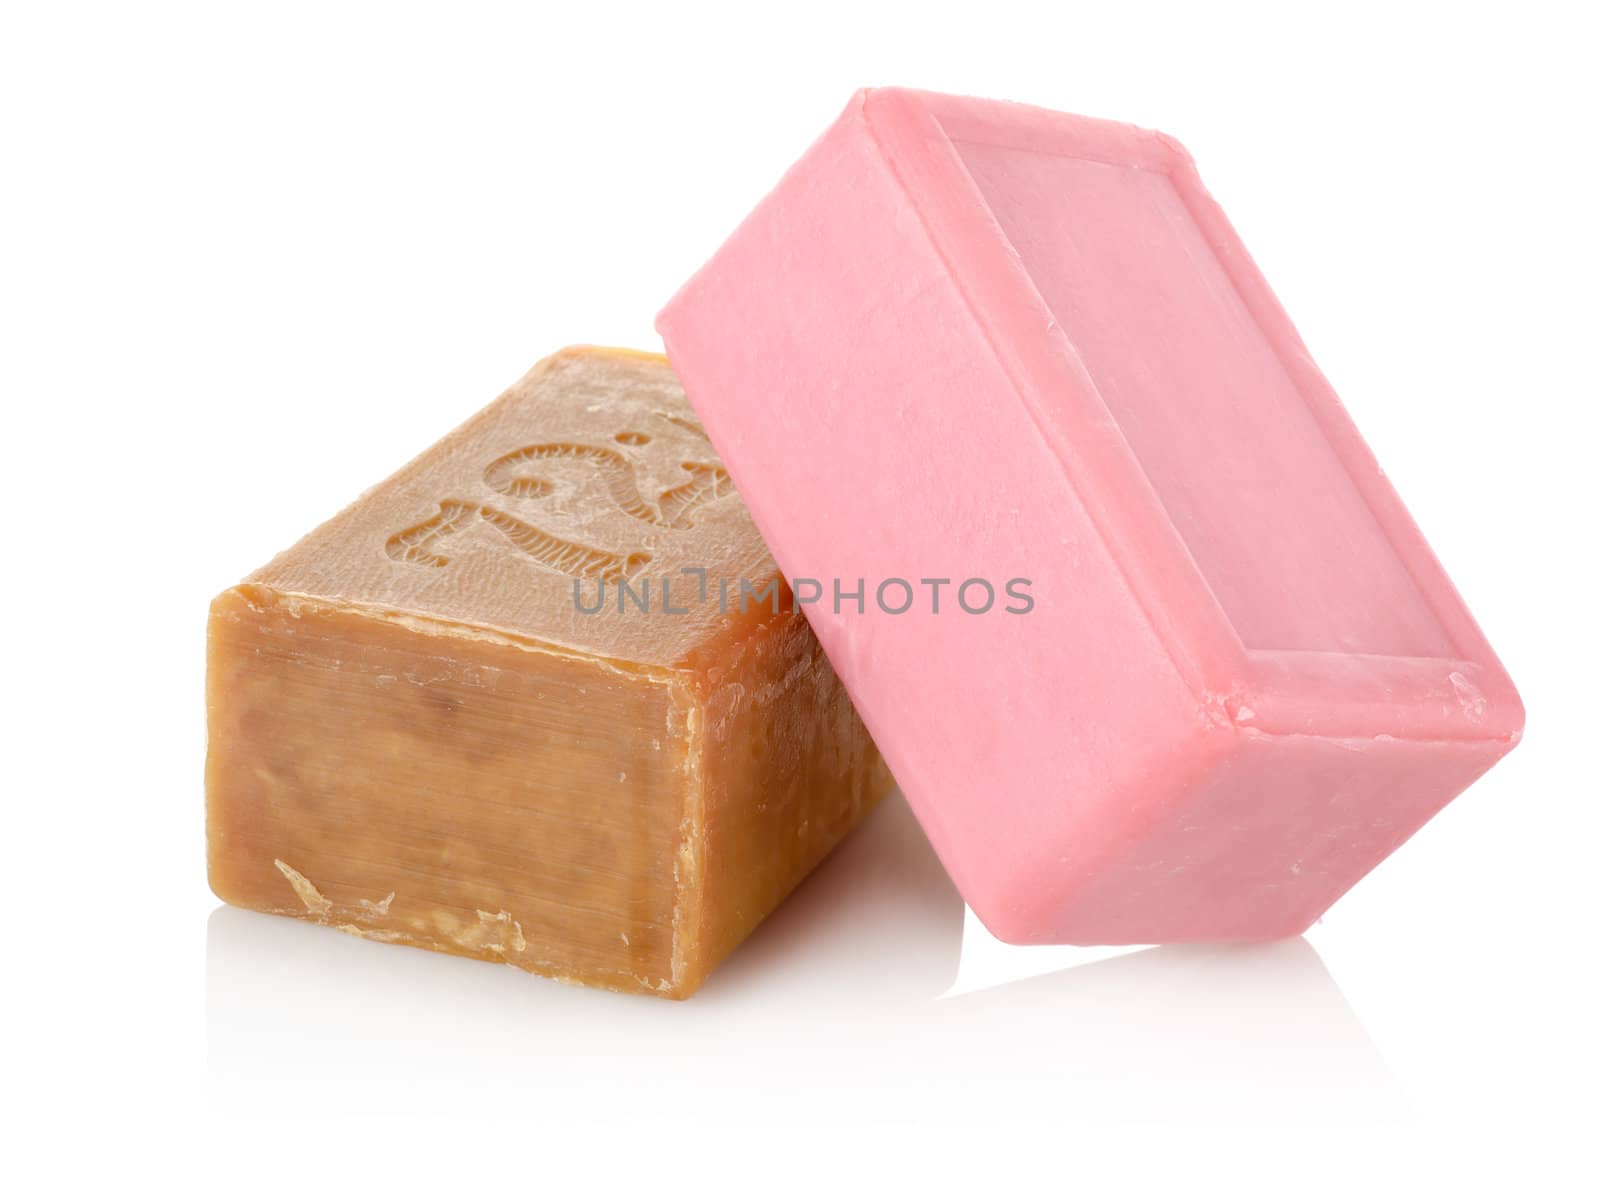 Two pieces of soap isolated on a white background